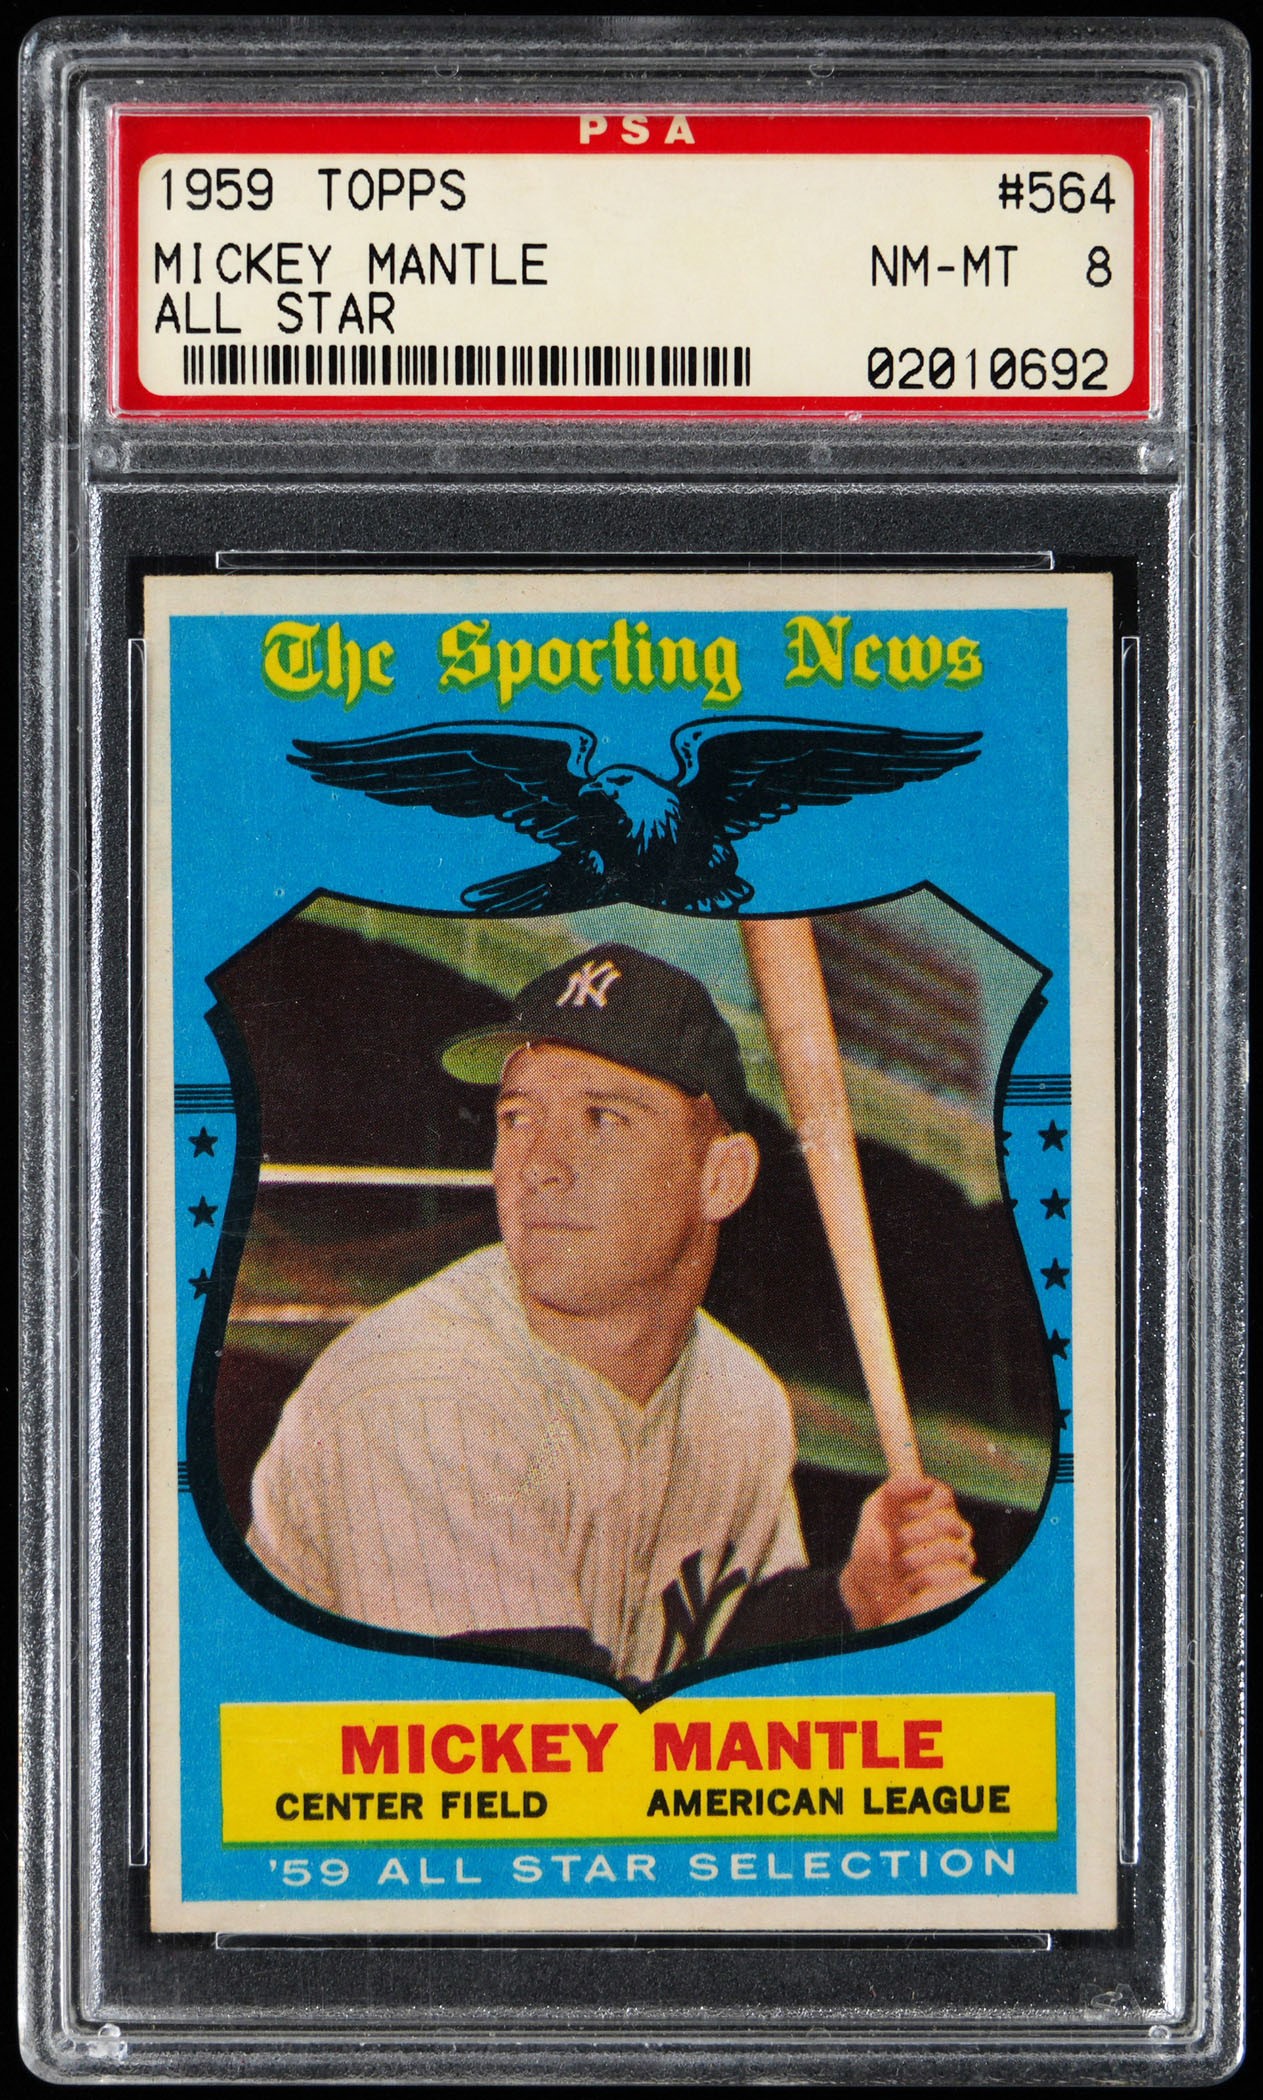 1959 Topps #564 Mickey Mantle All Star PSA NM-MT 8